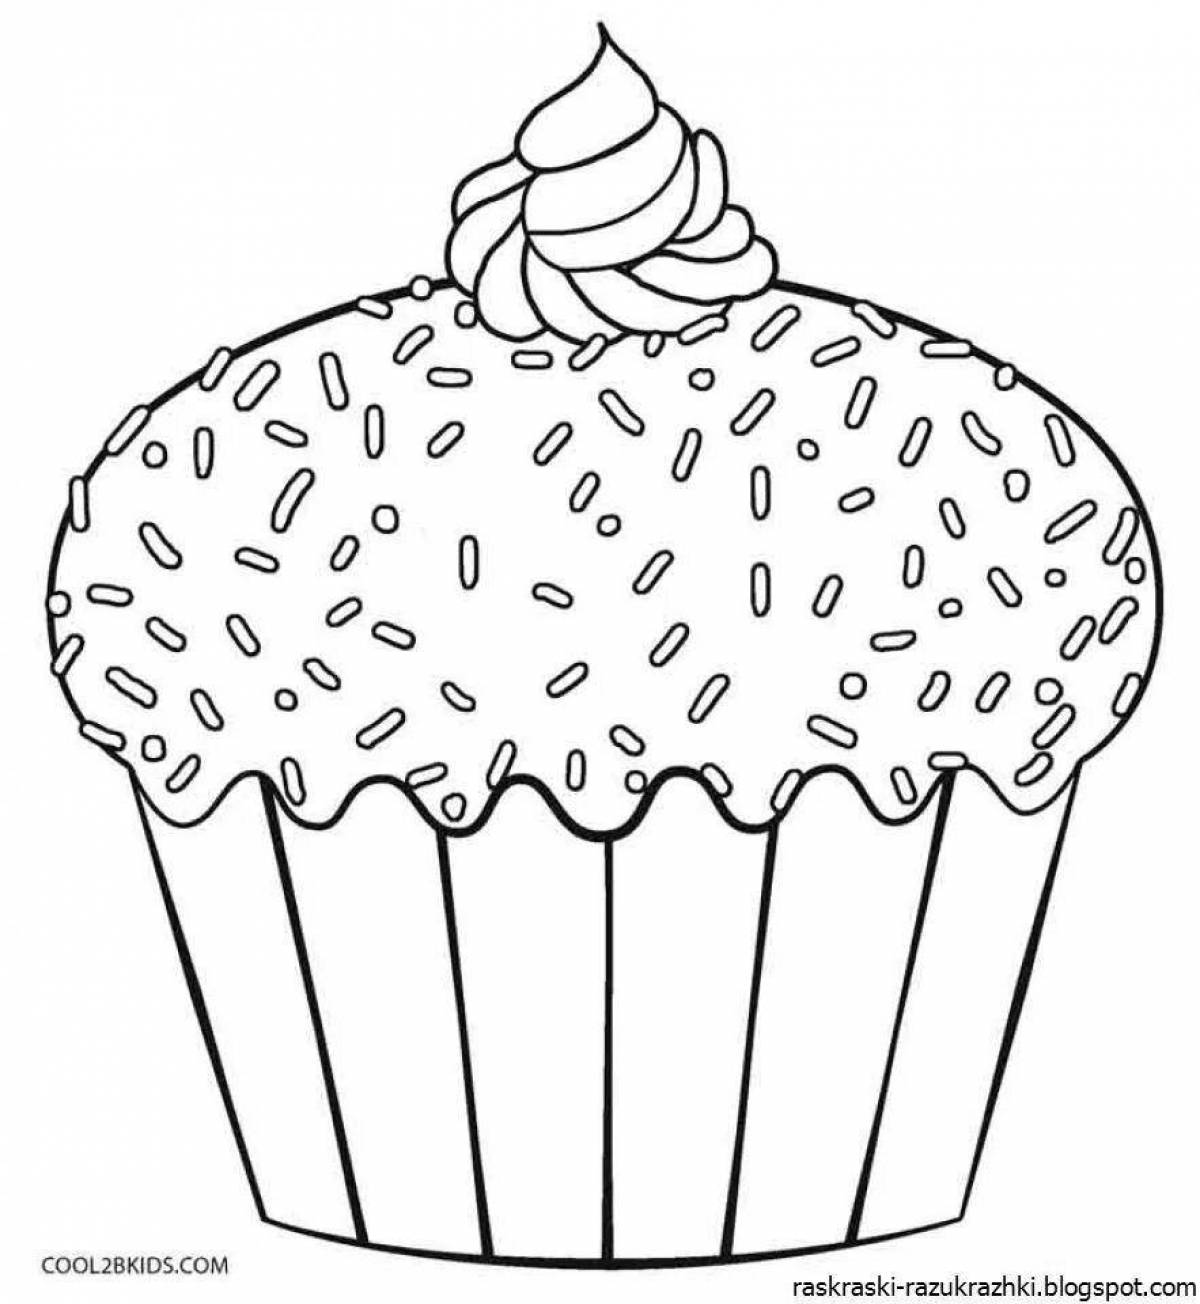 Adorable cupcake coloring book for kids